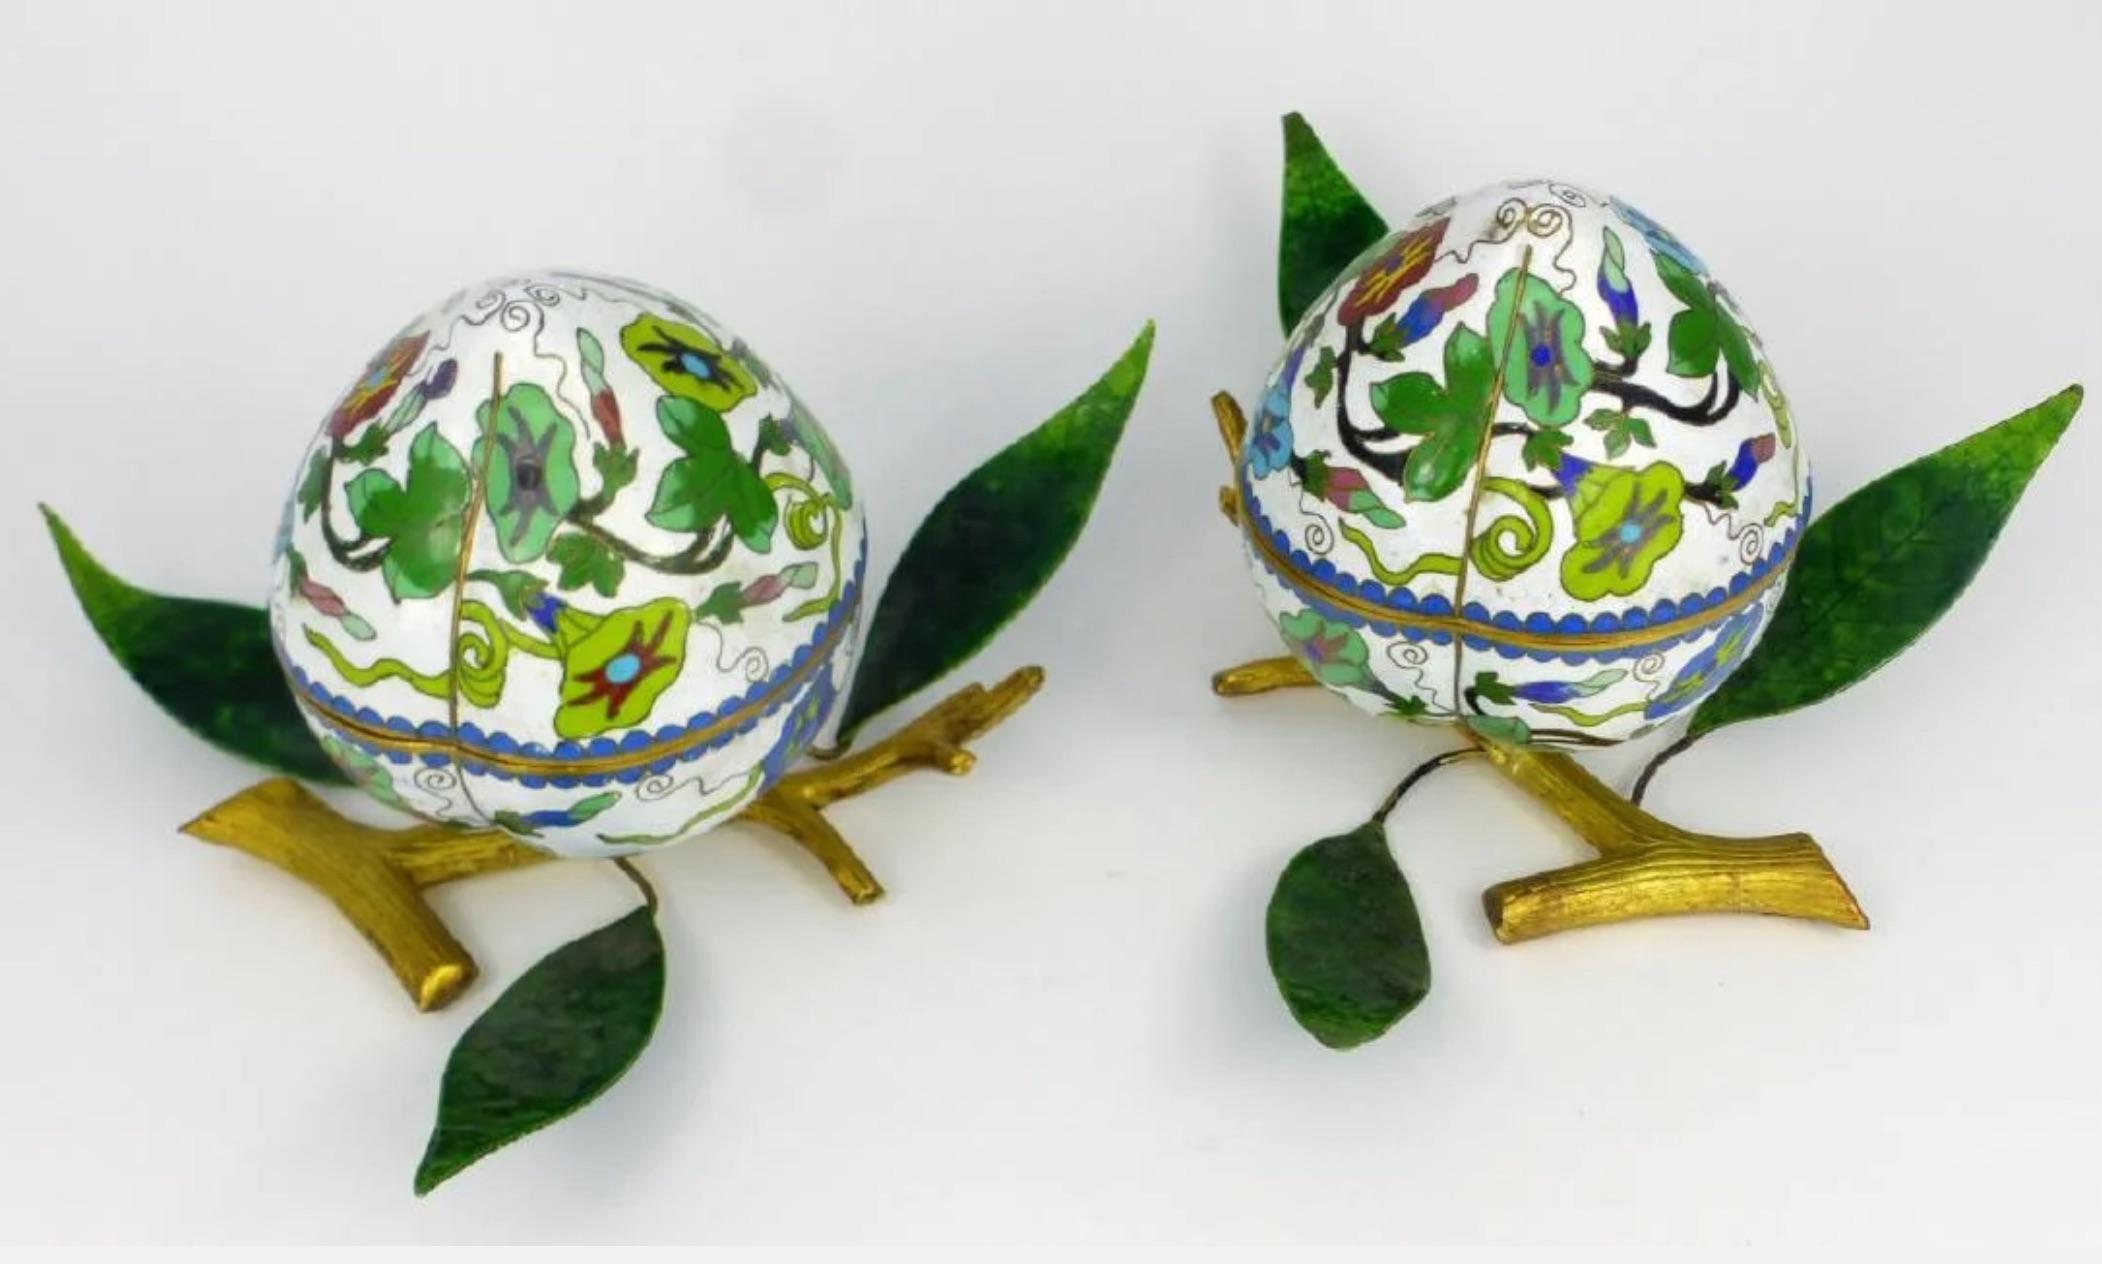 Simply Palatial  pair of Chinese cloisonné enamel peach form box and cover for a Conoisseur.
The boxes are beautifully detailed-Both the cover and the box decorated with colorful enamel floral leafy branches over a white ground- rich aqua blue